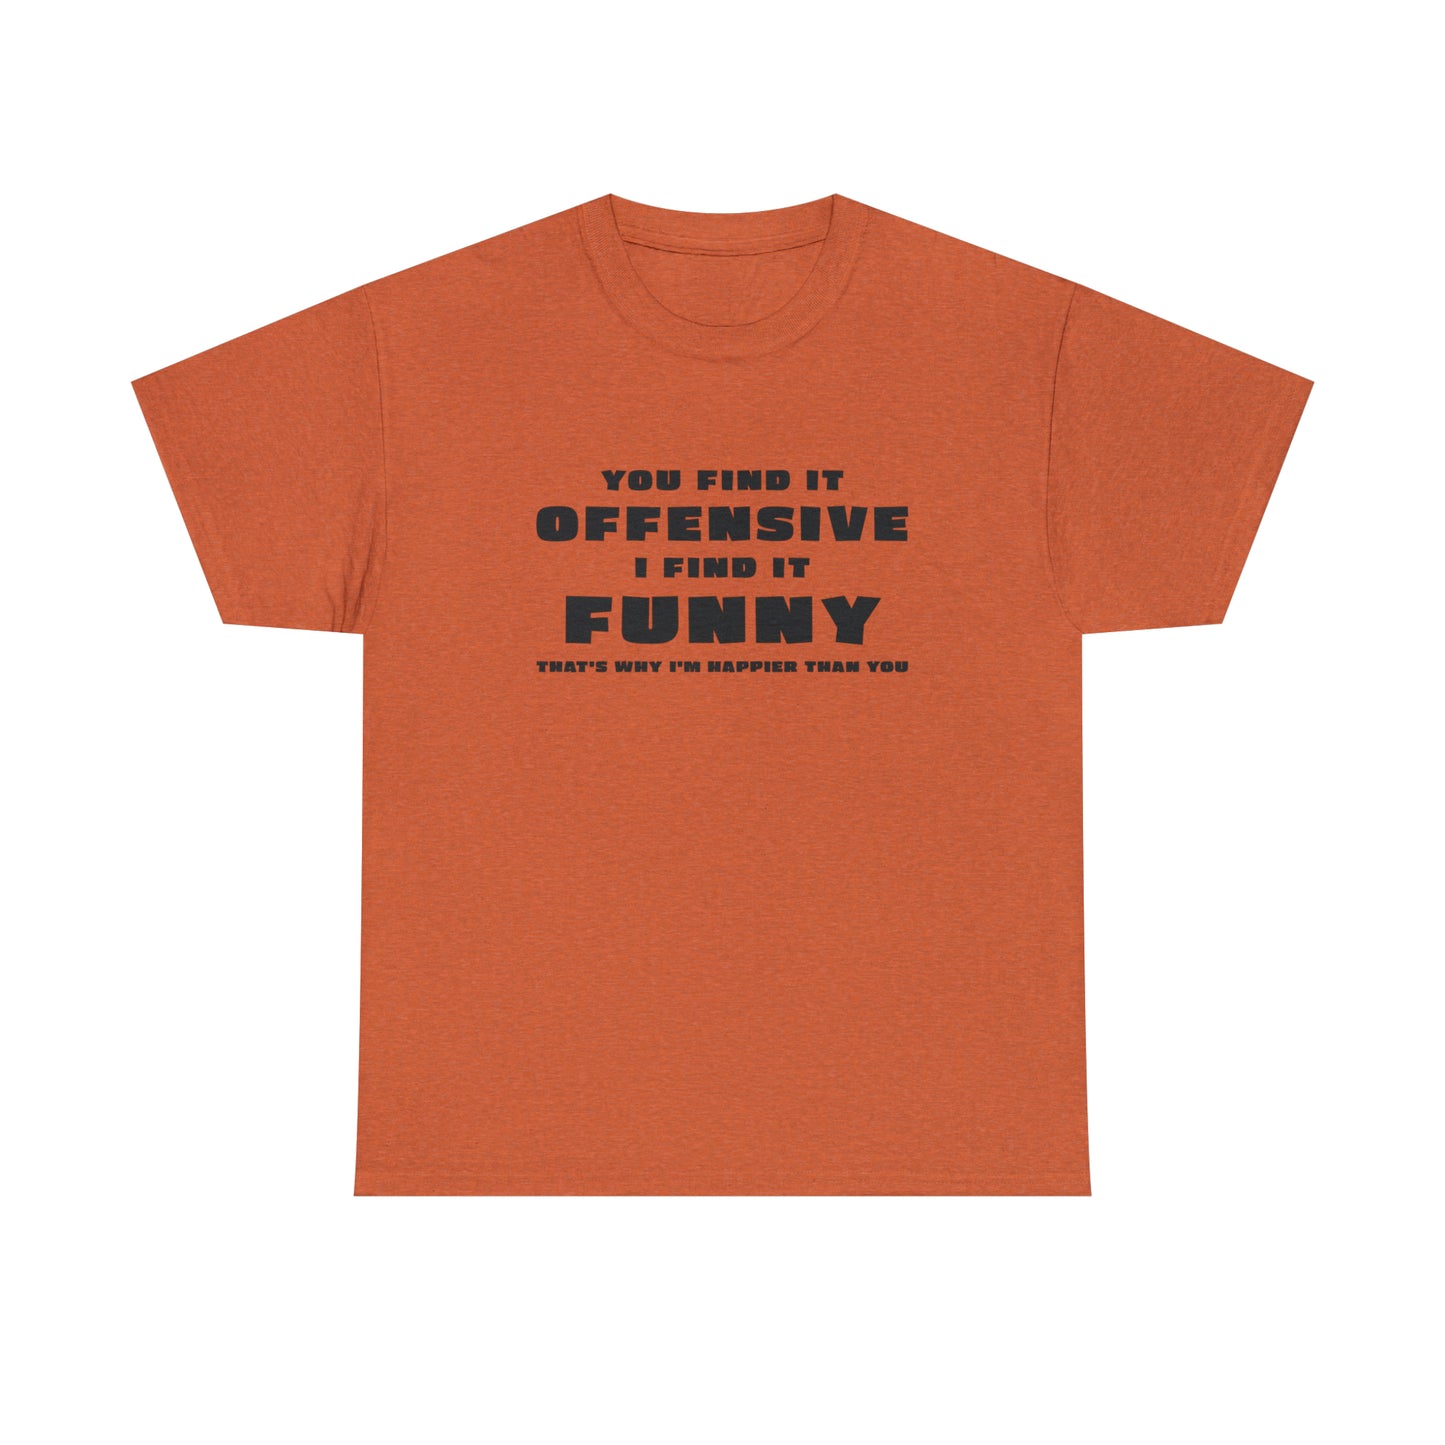 Funny T-Shirt For Offensive T Shirt For Being Happy TShirt For Sarcastic Tee